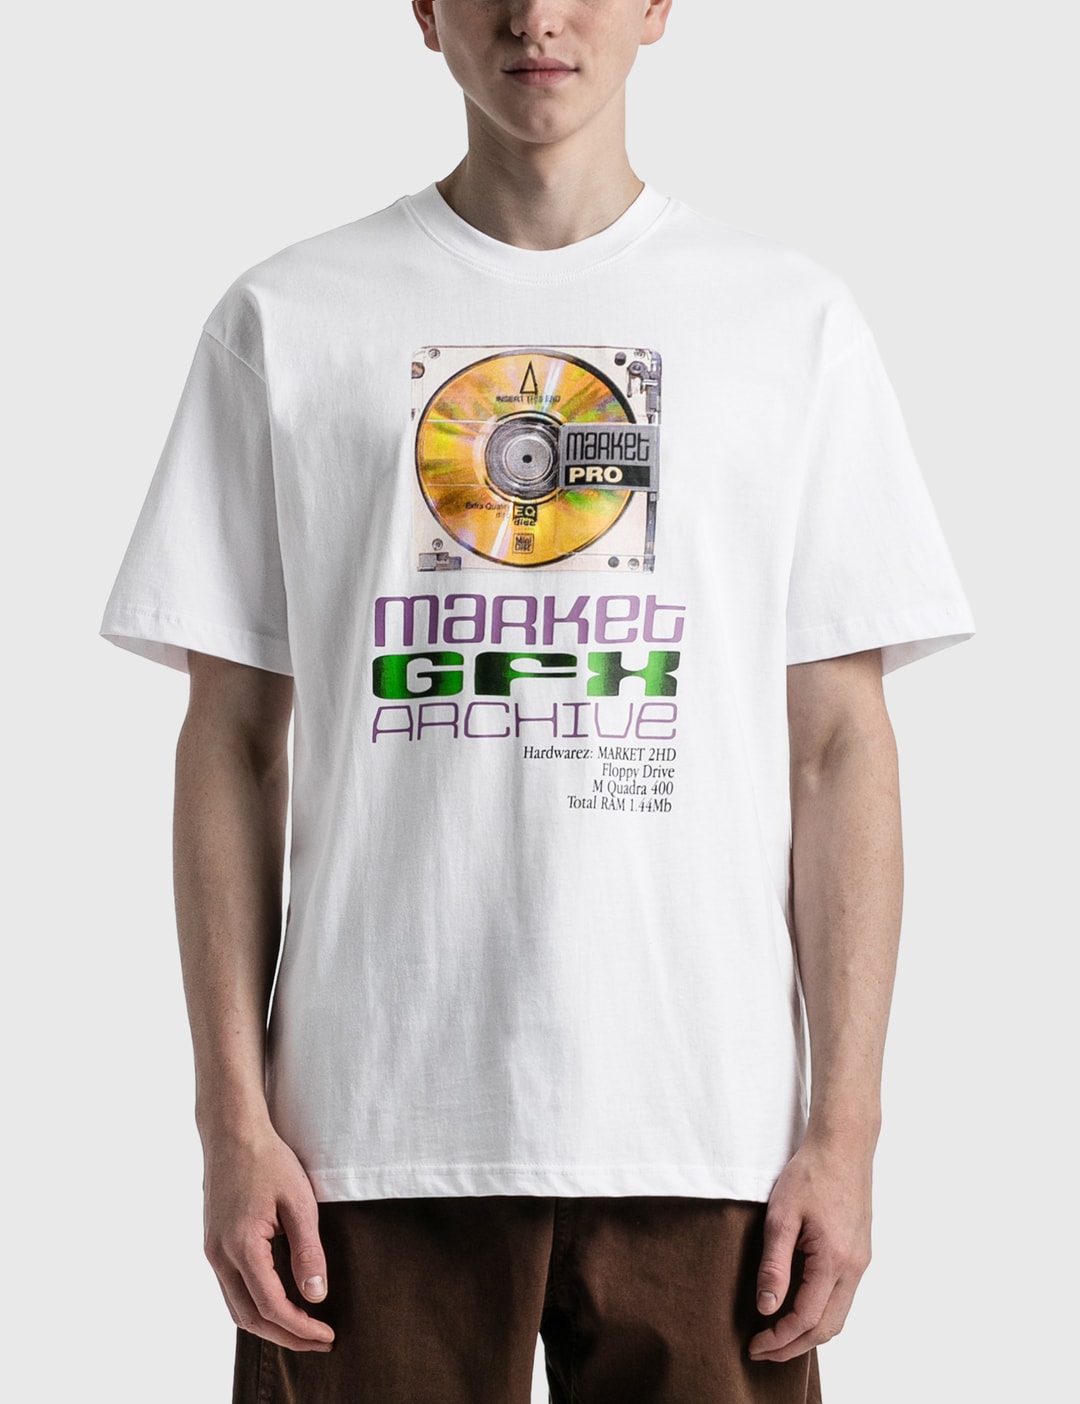 Market - Market GFX Archive T-shirt | HBX - Globally Curated Fashion ...